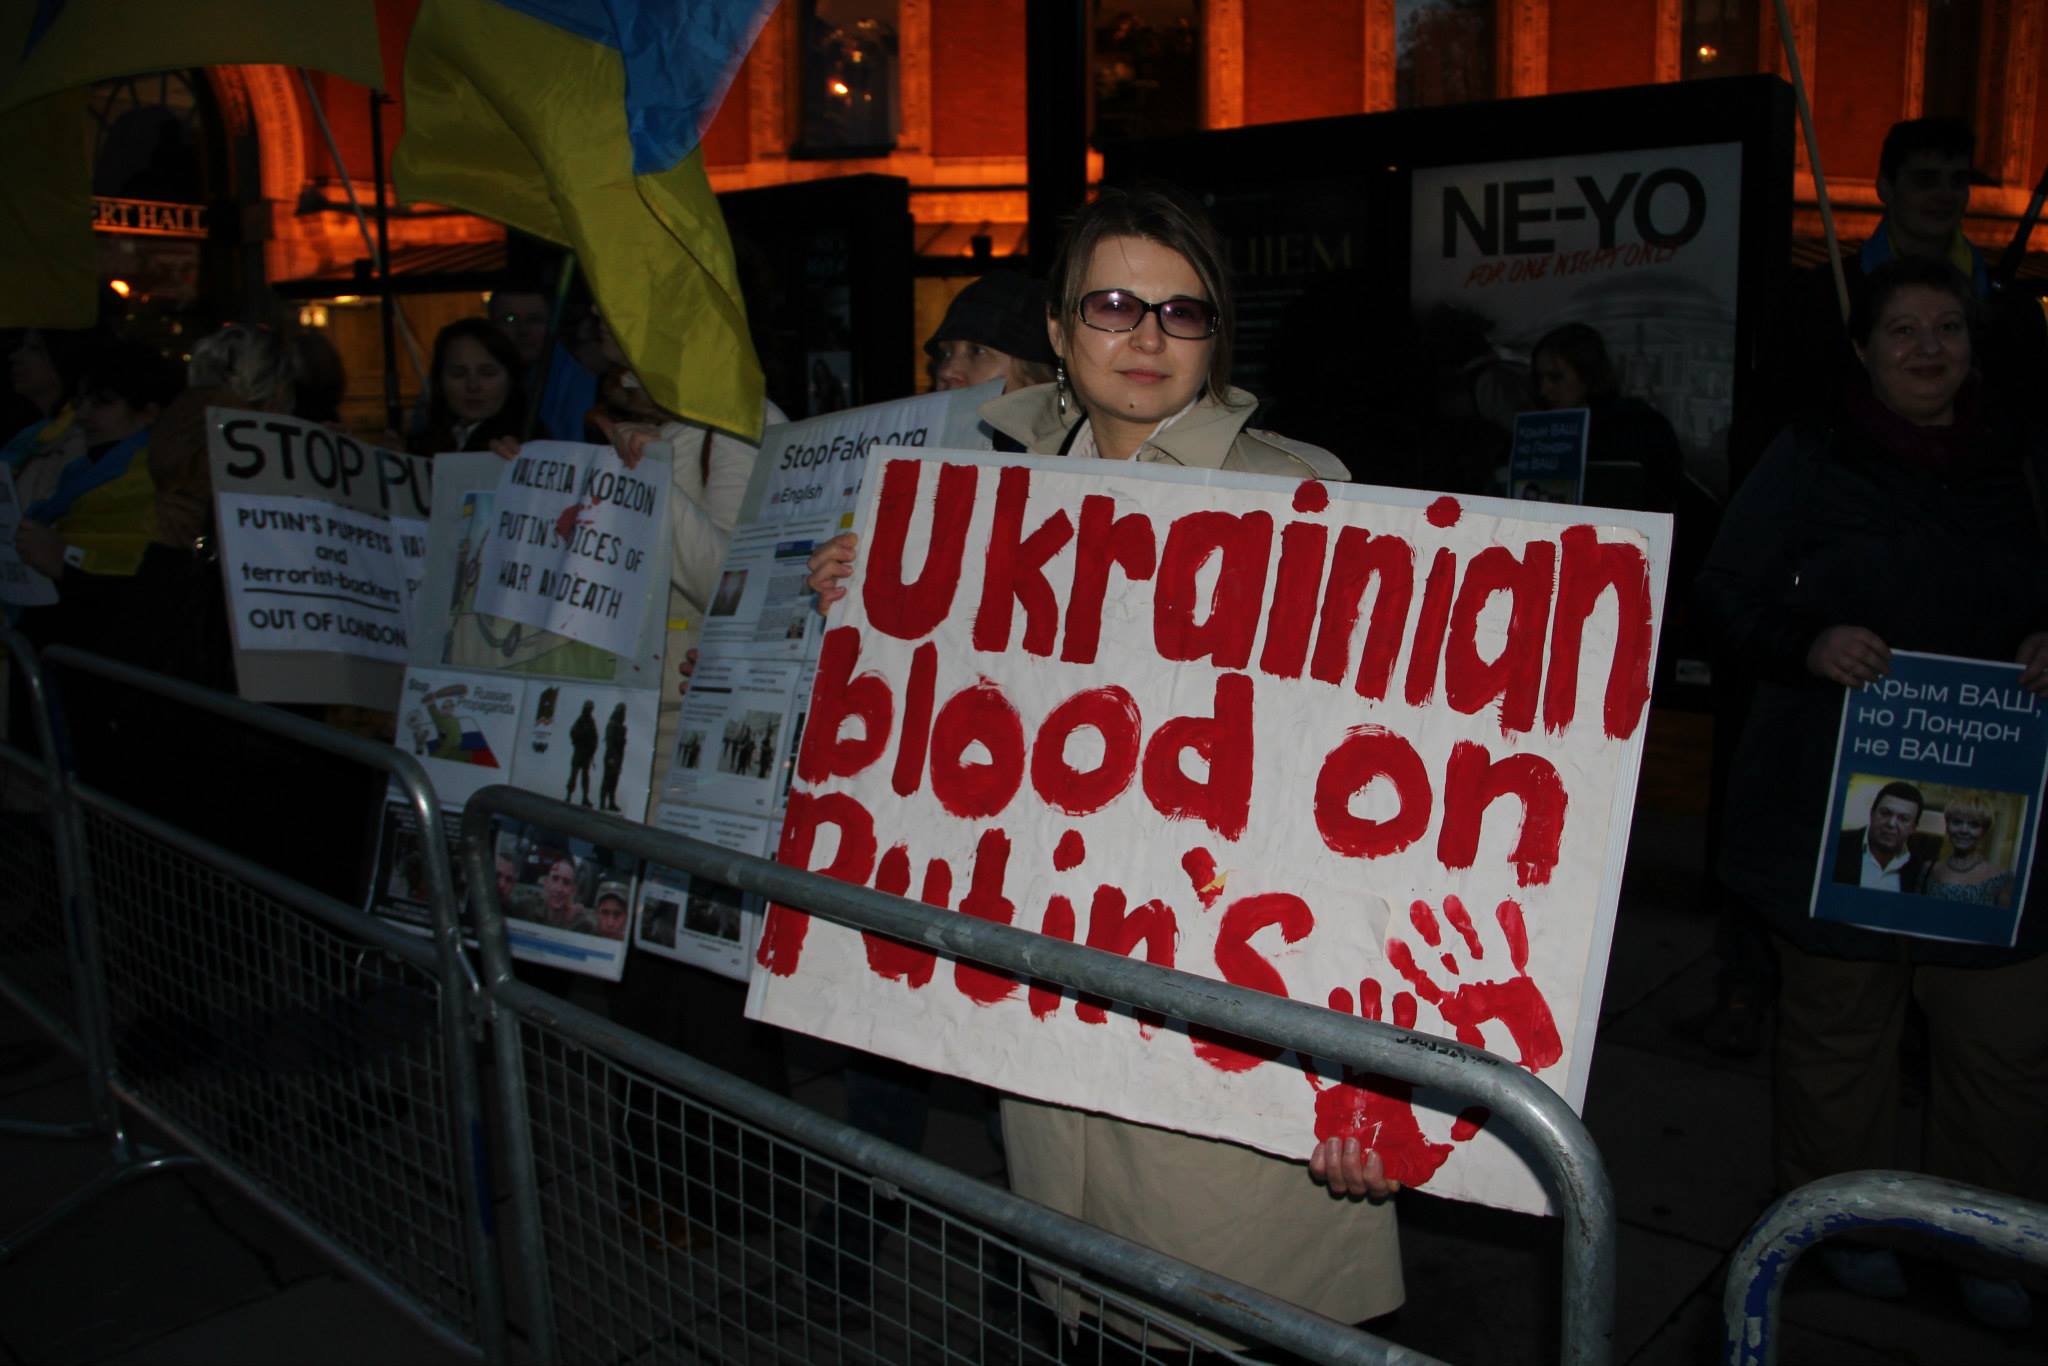 Protest at Royal Albert Hall against Putin’s propagandists and terrorist backers Kobzon and Valeria